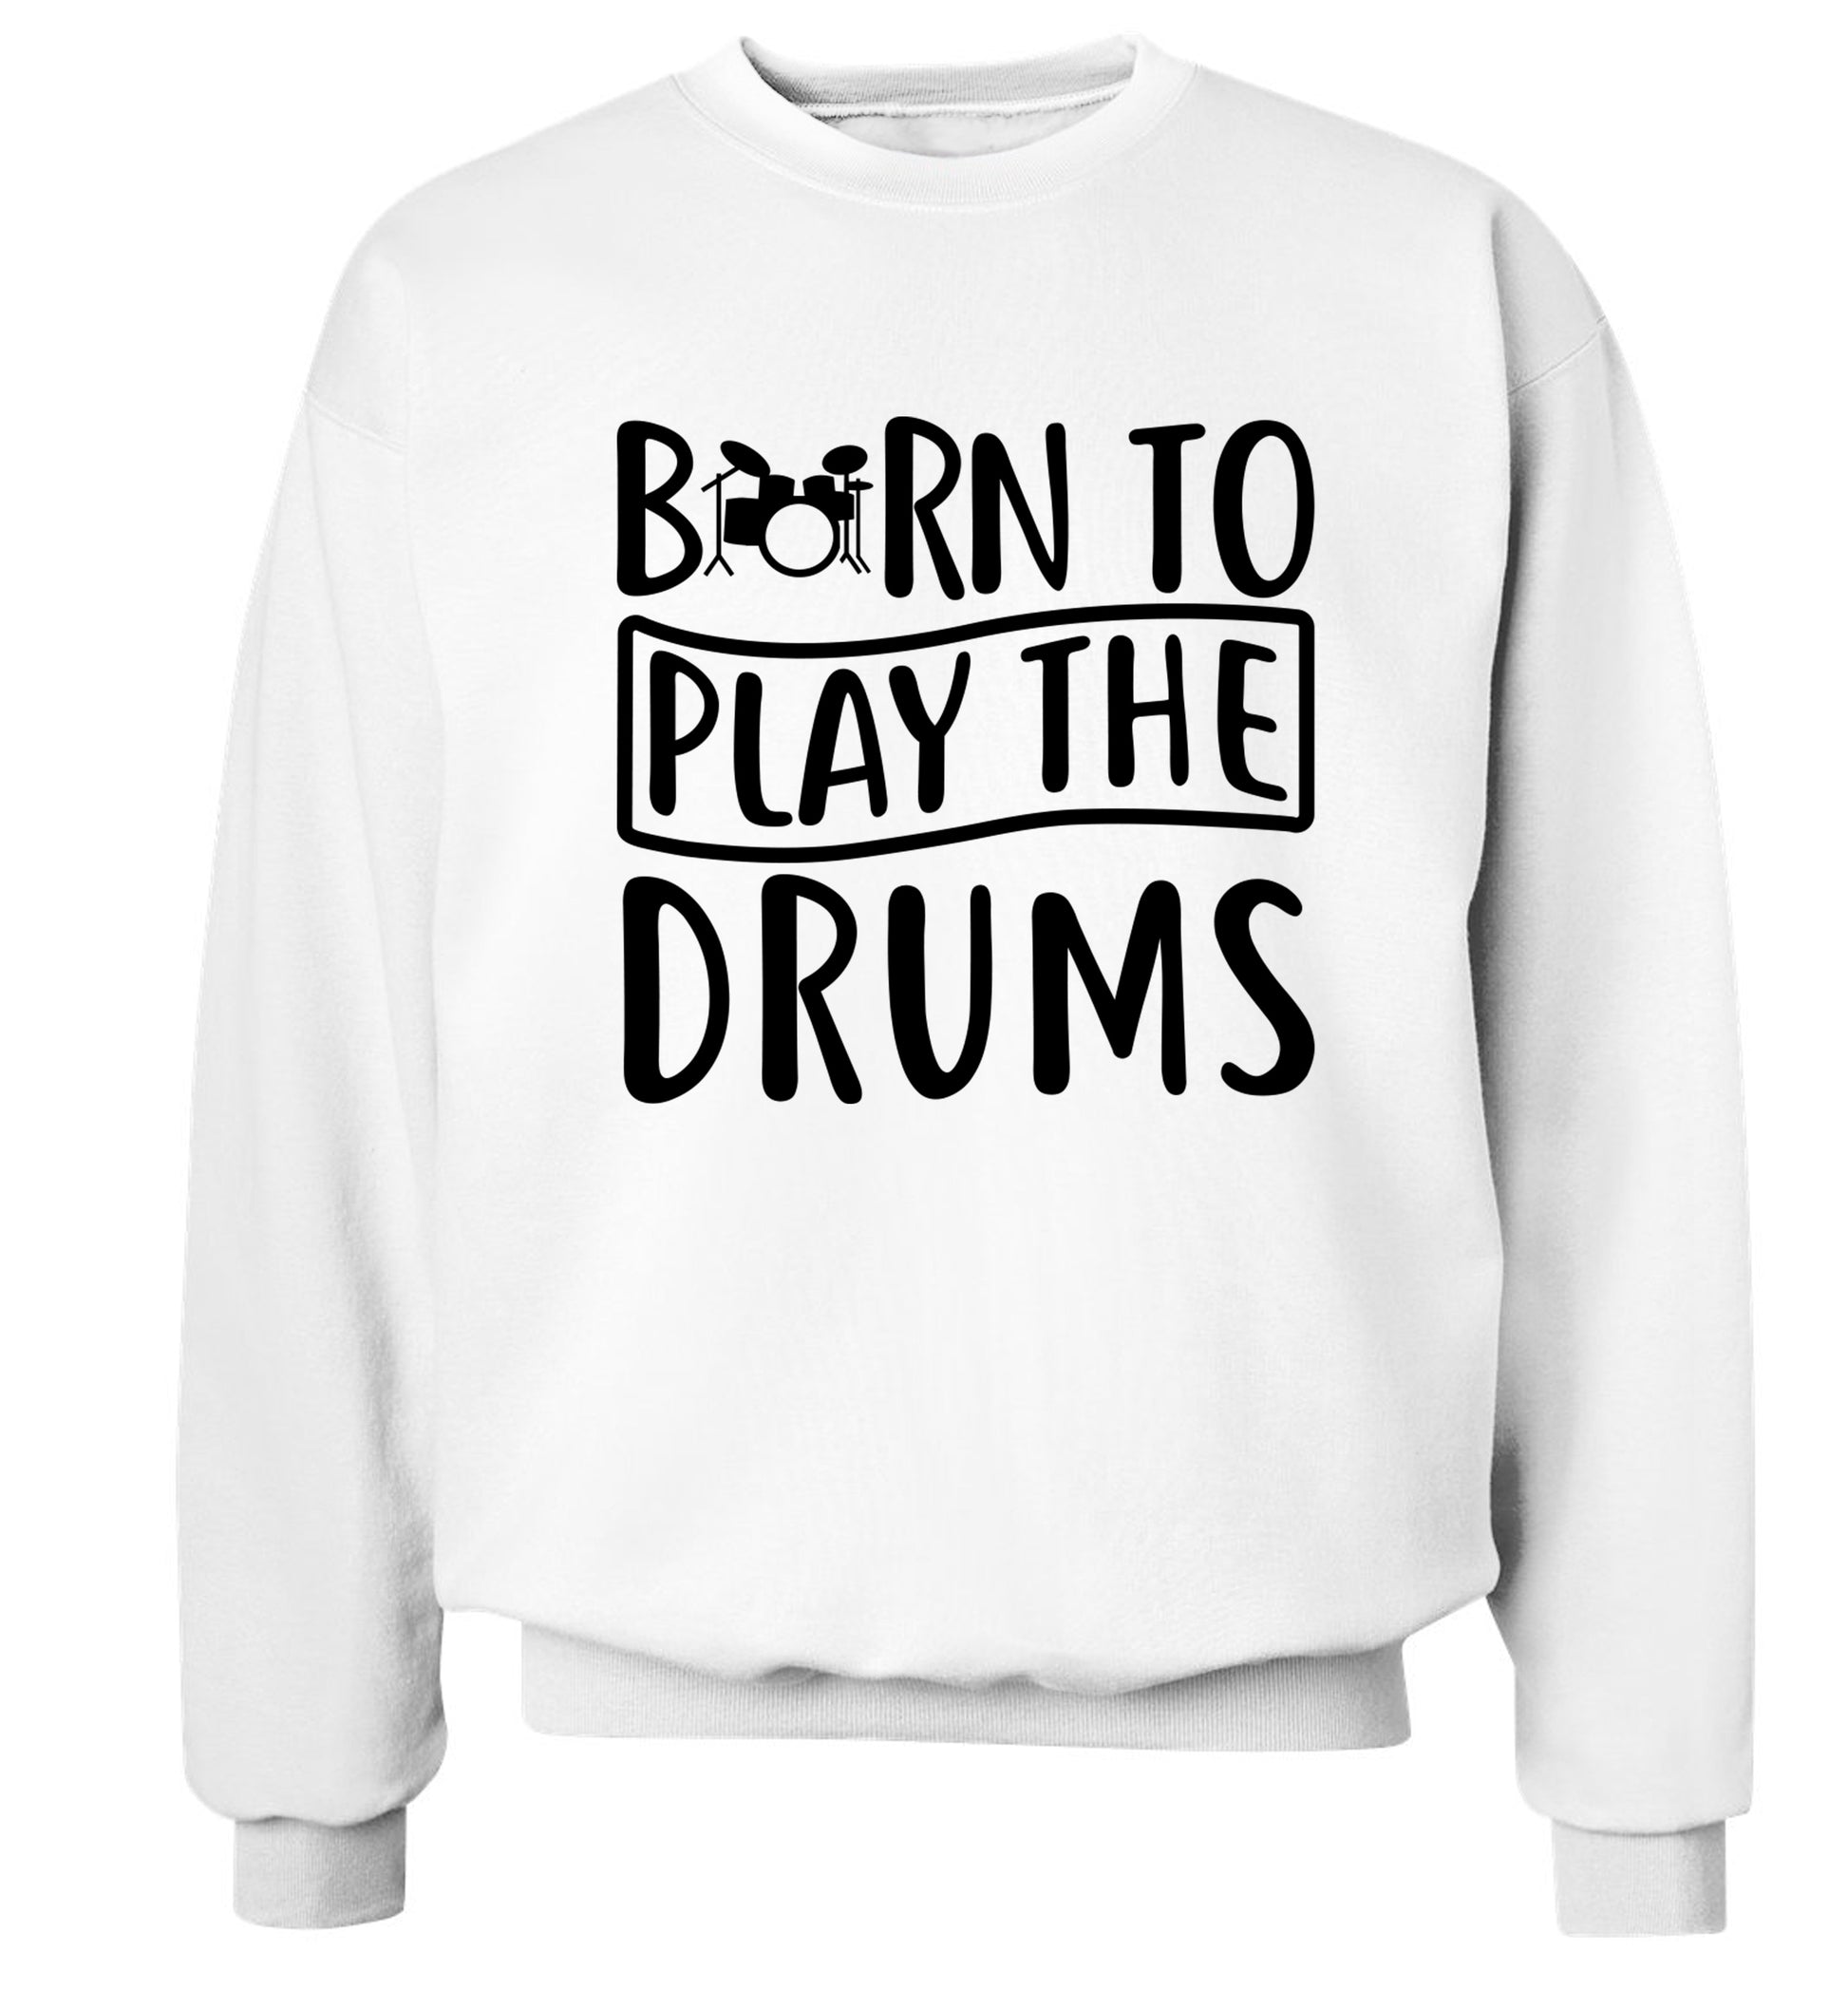 Born to play the drums Adult's unisex white Sweater 2XL